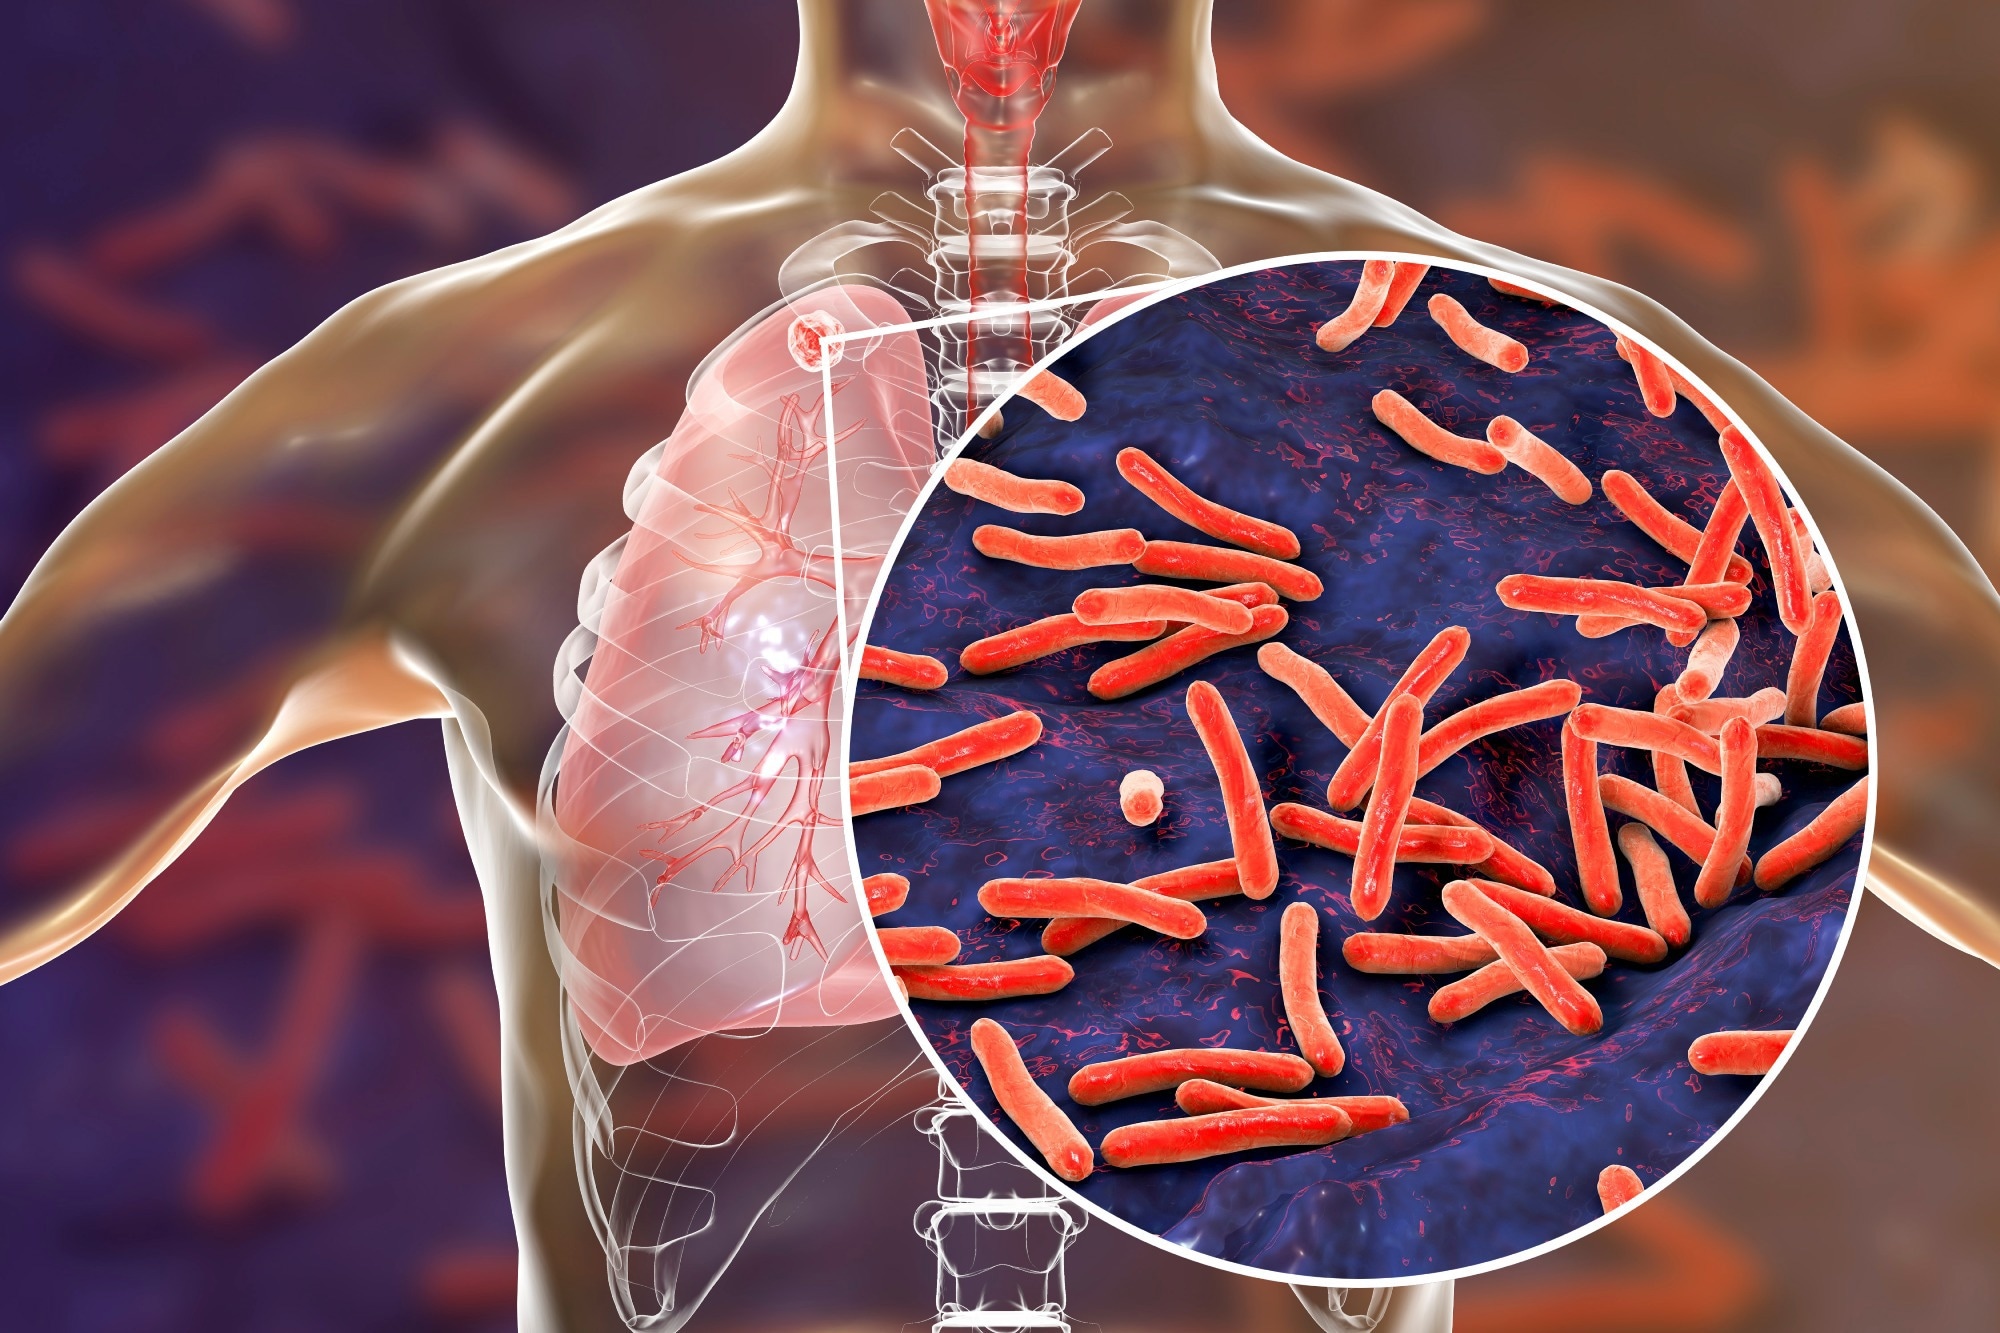 Study: Mixed infections in genotypic drug-resistant Mycobacterium tuberculosis. Image Credit: Kateryna Kon/Shutterstock.com